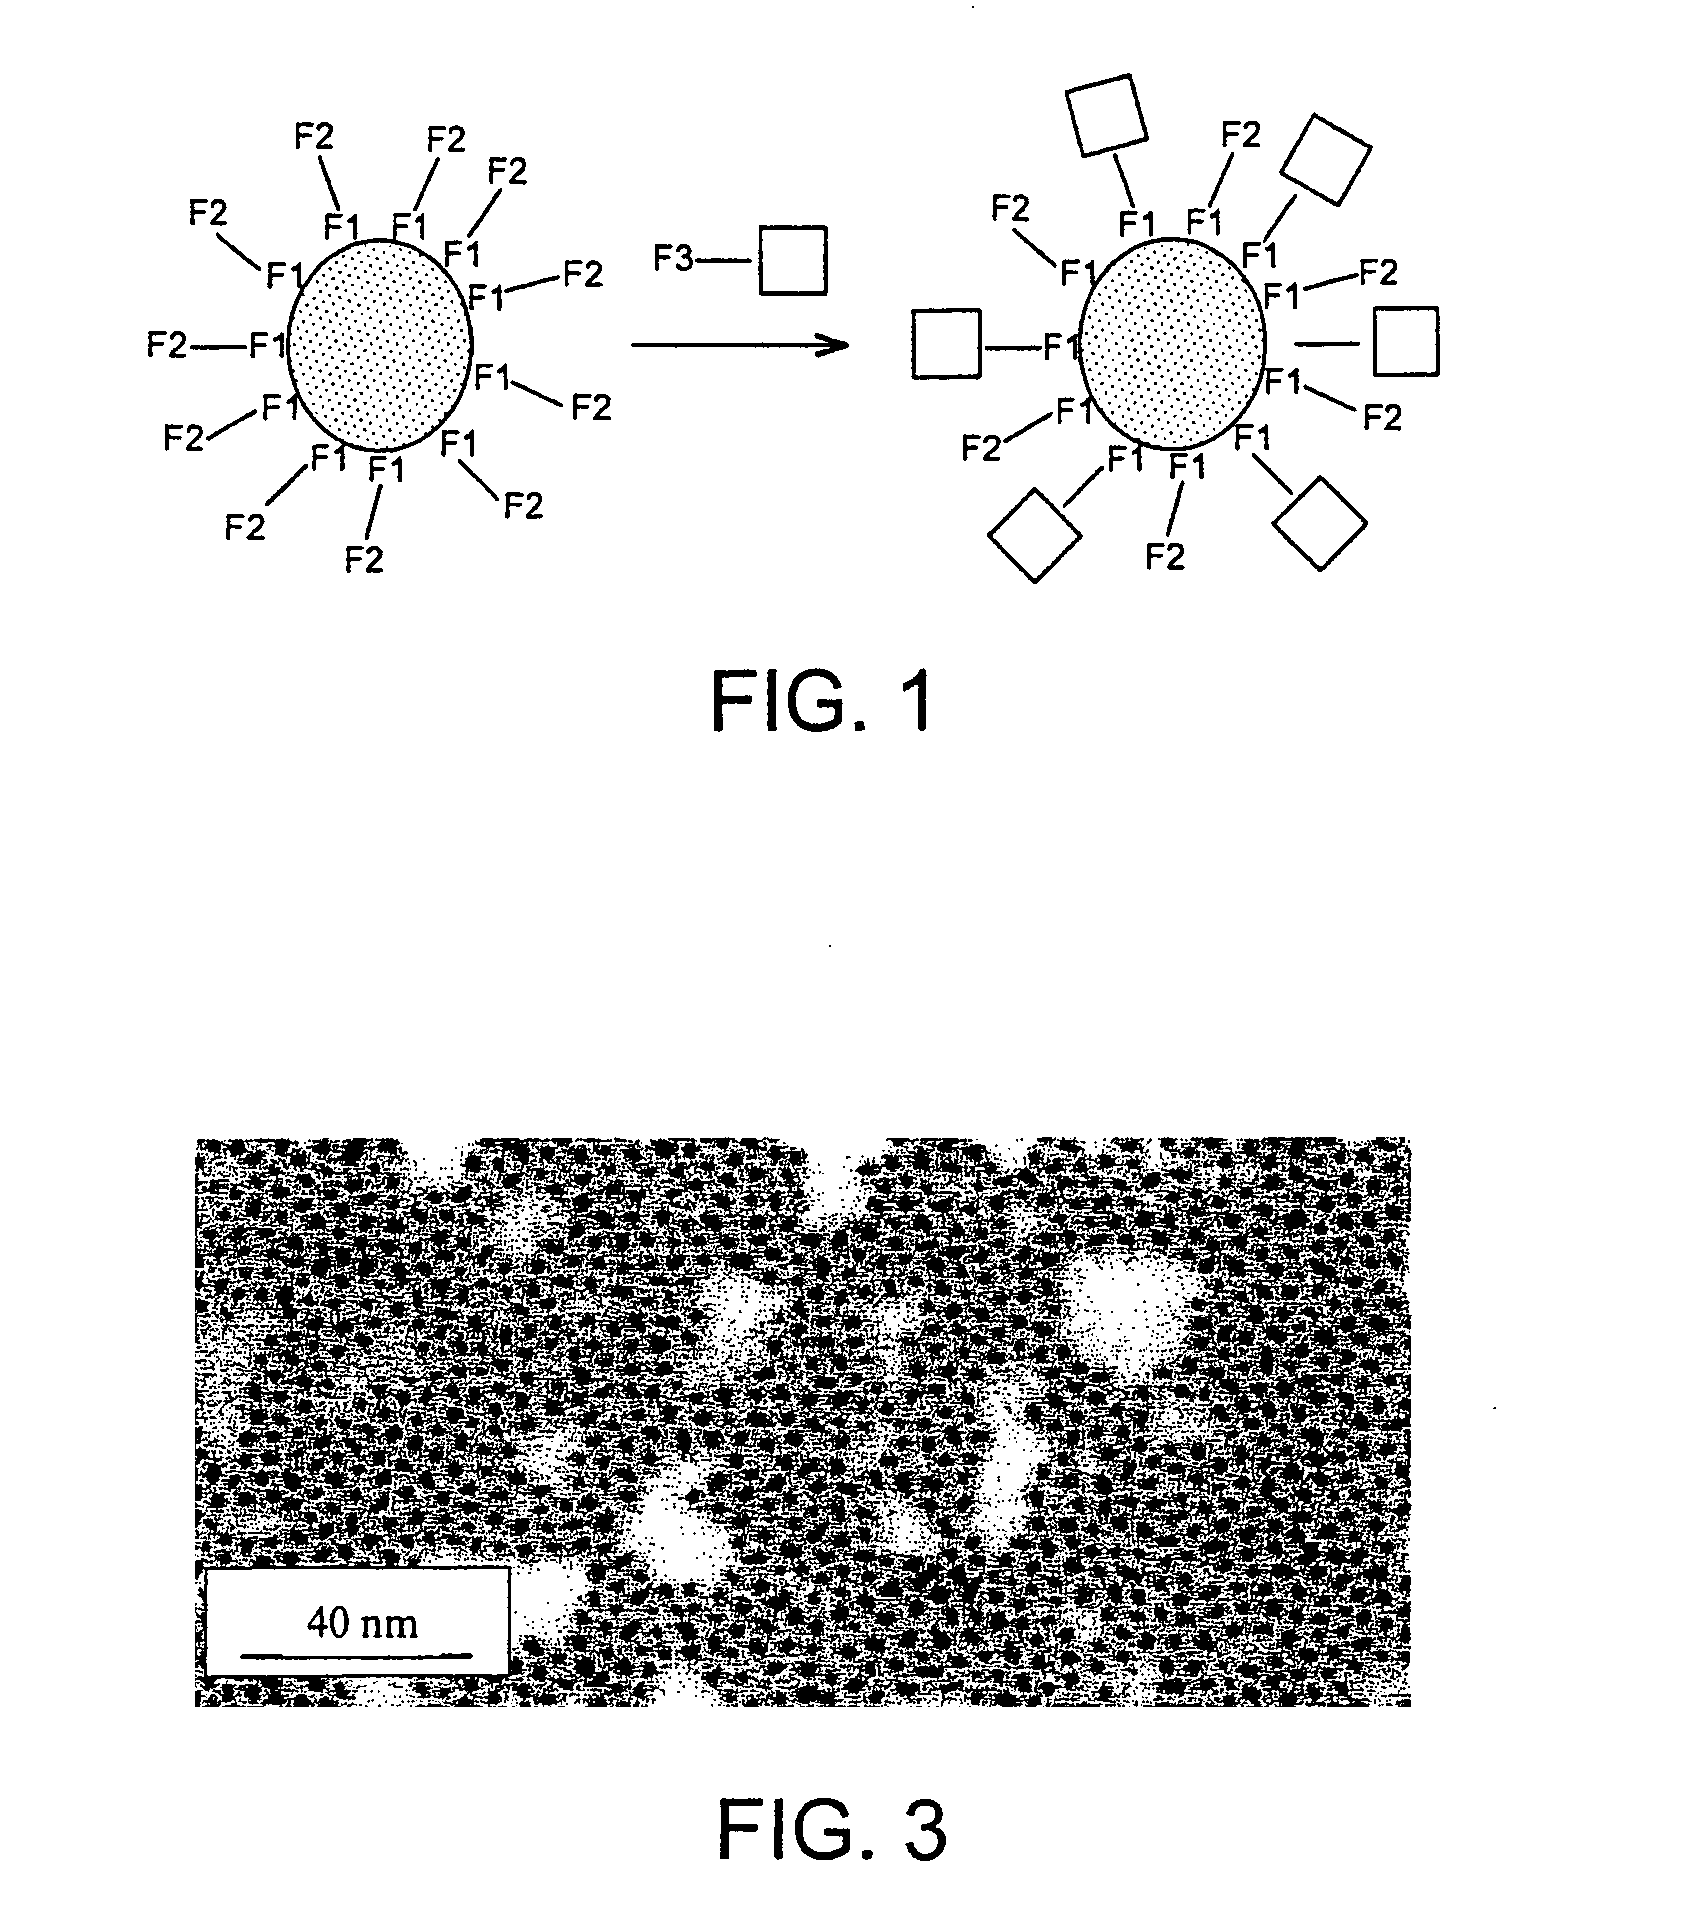 Nanoparticles comprising a metal core and an organic double coating useful as catalysts and device containing the nanoparticles